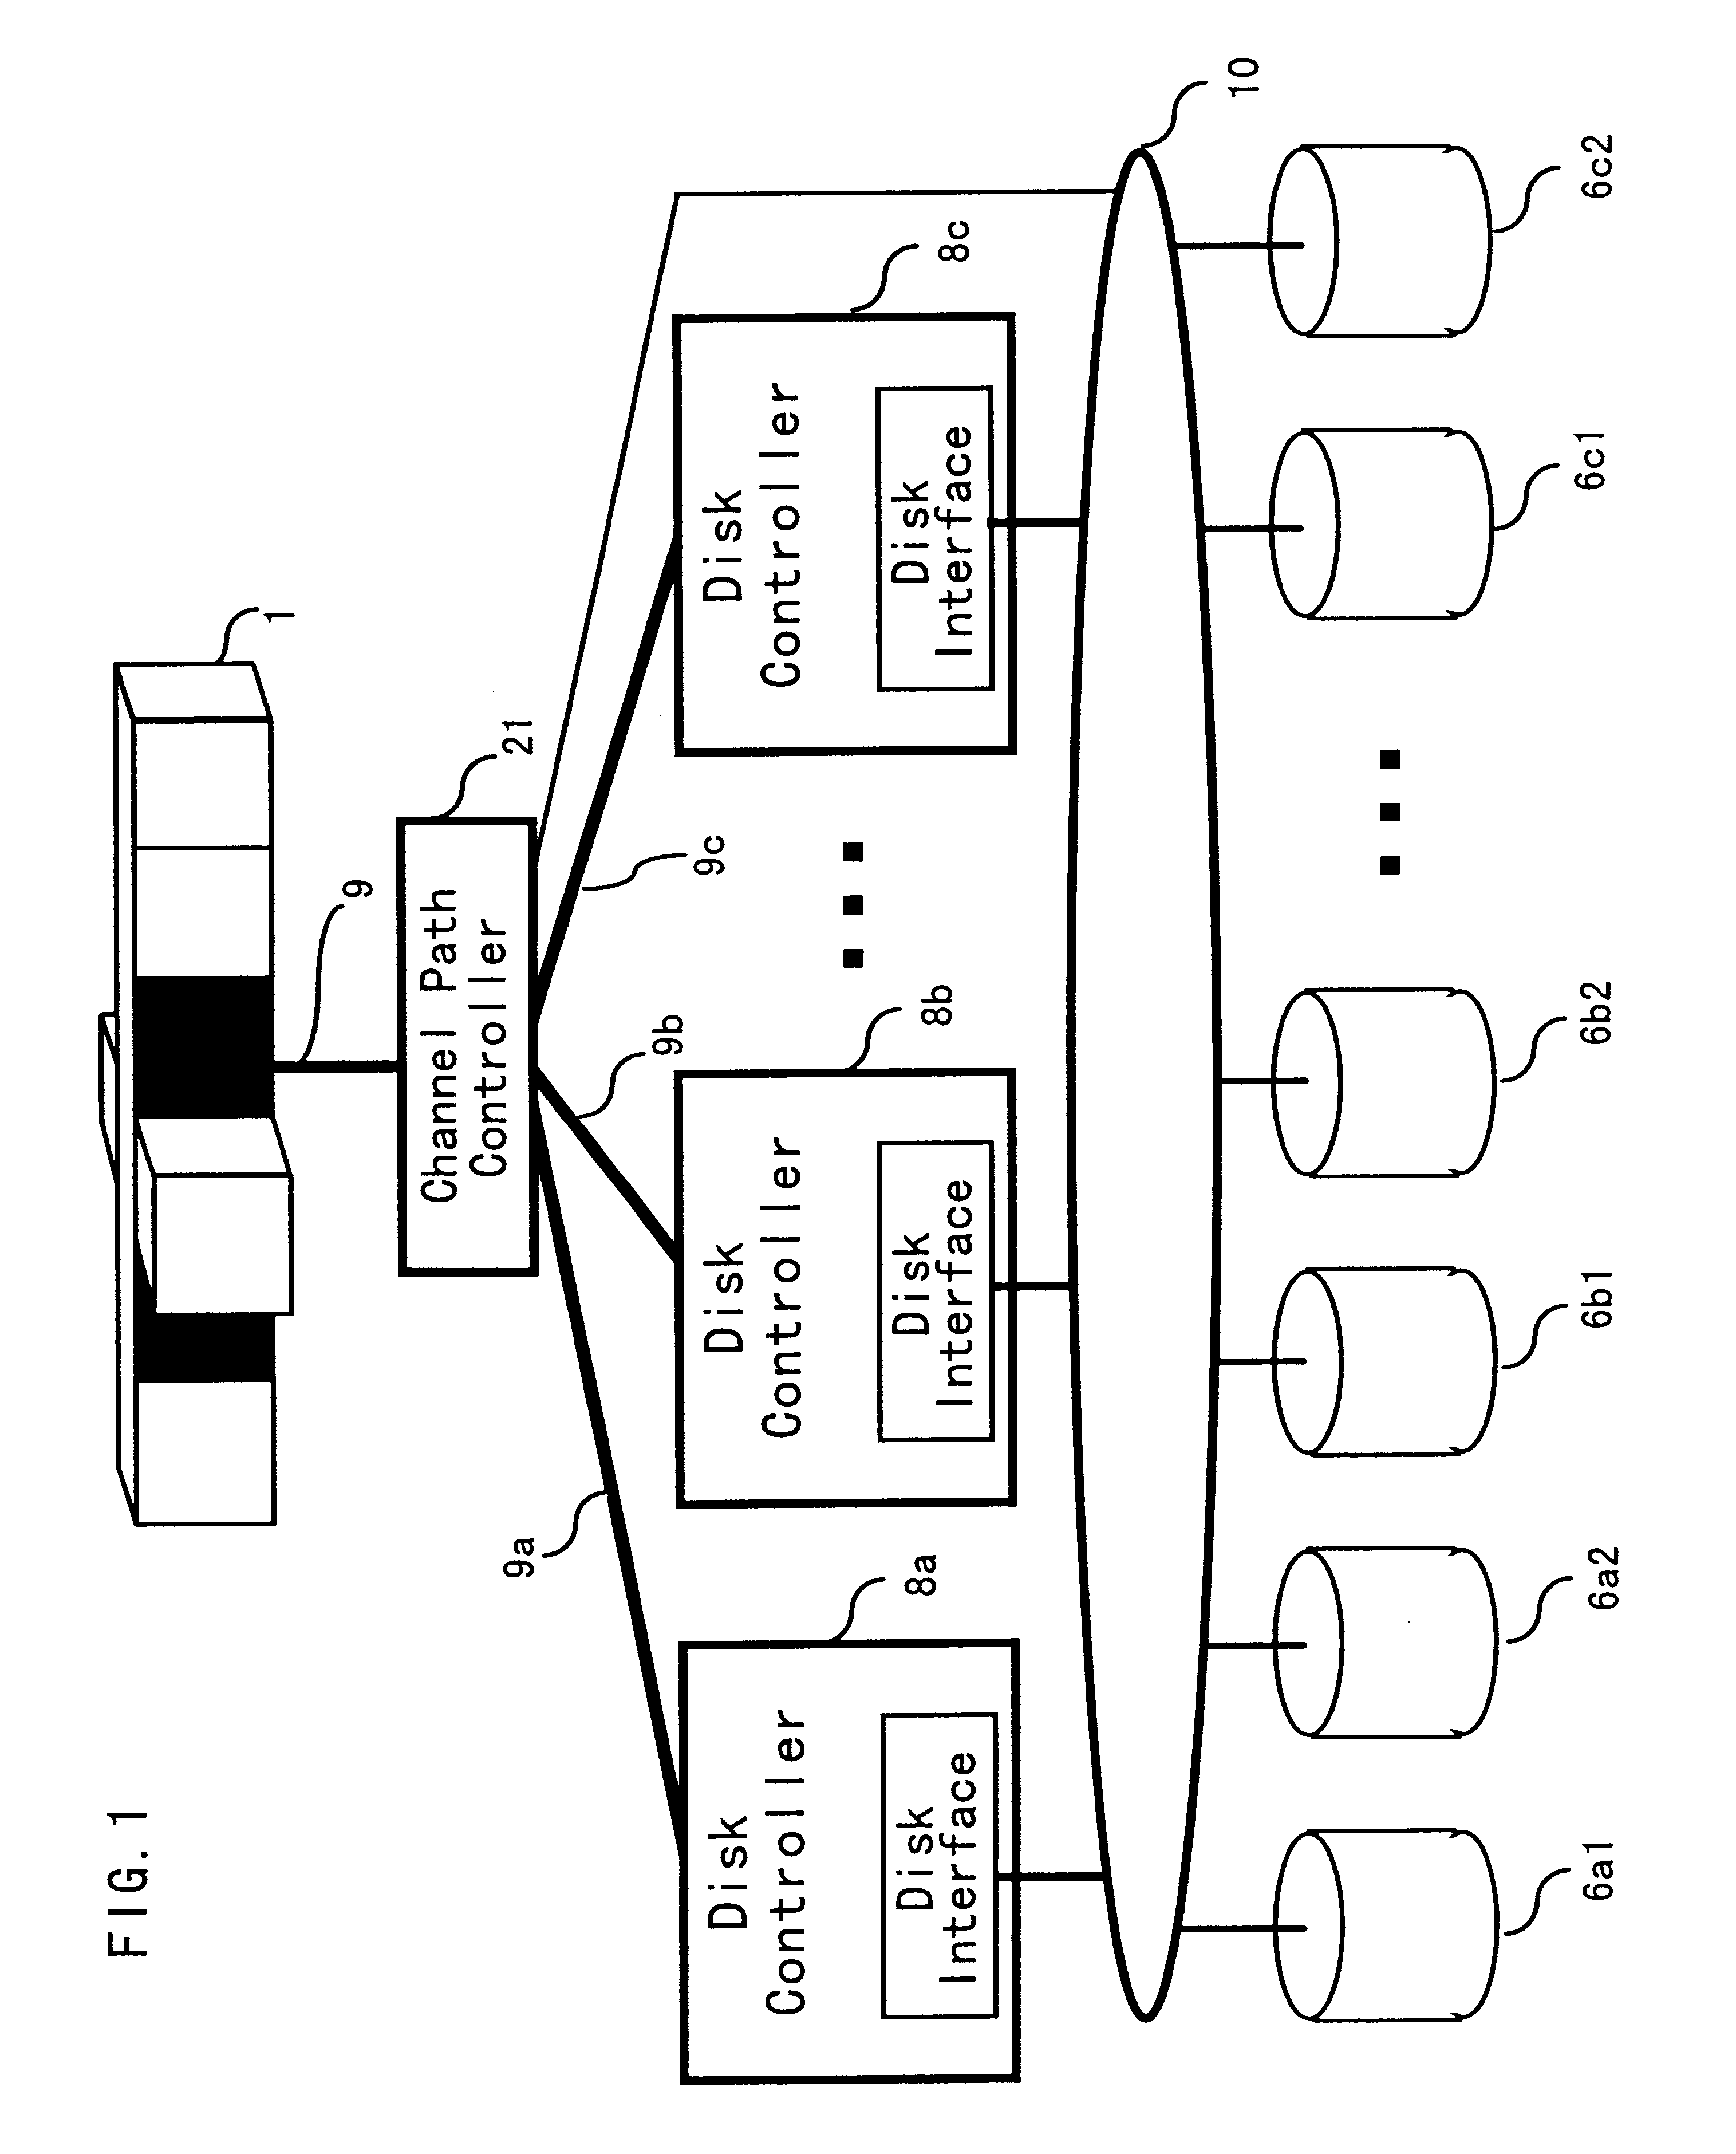 Storage subsystem which balances loads across a plurality of disk controllers